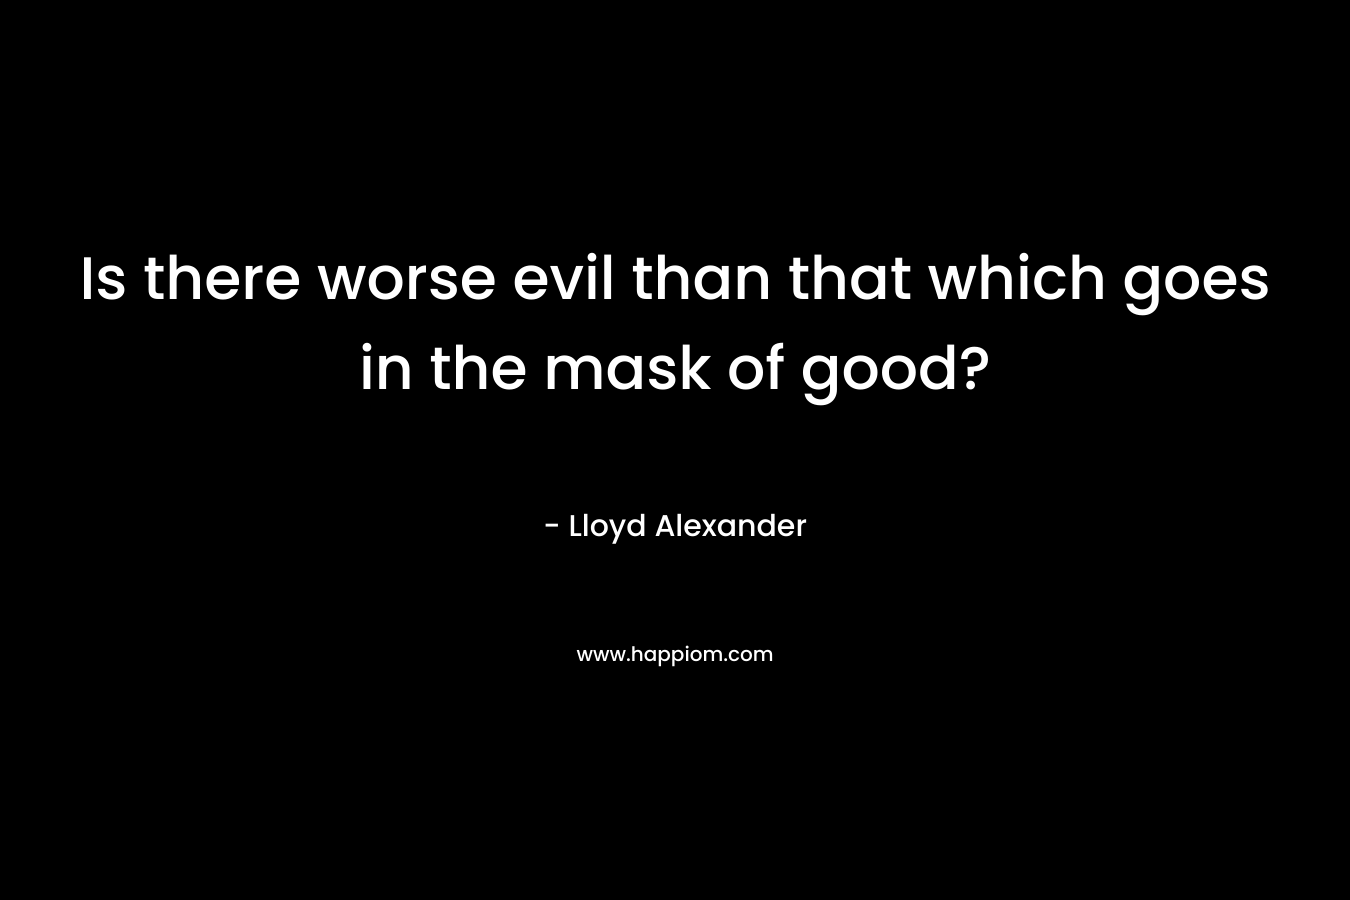 Is there worse evil than that which goes in the mask of good?